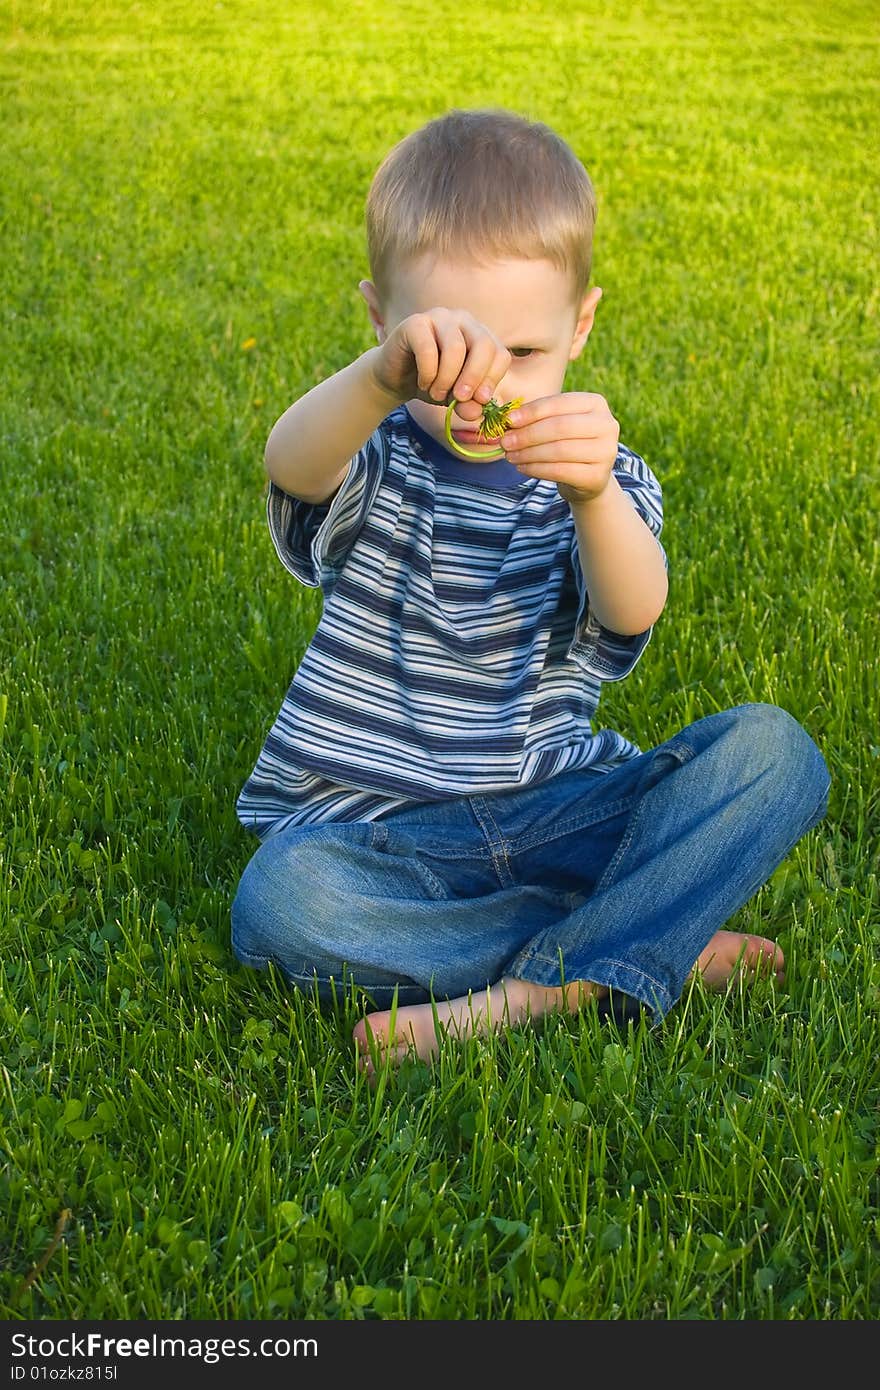 The four-year boy sits on a grass and looks at the bent dandelion. The four-year boy sits on a grass and looks at the bent dandelion